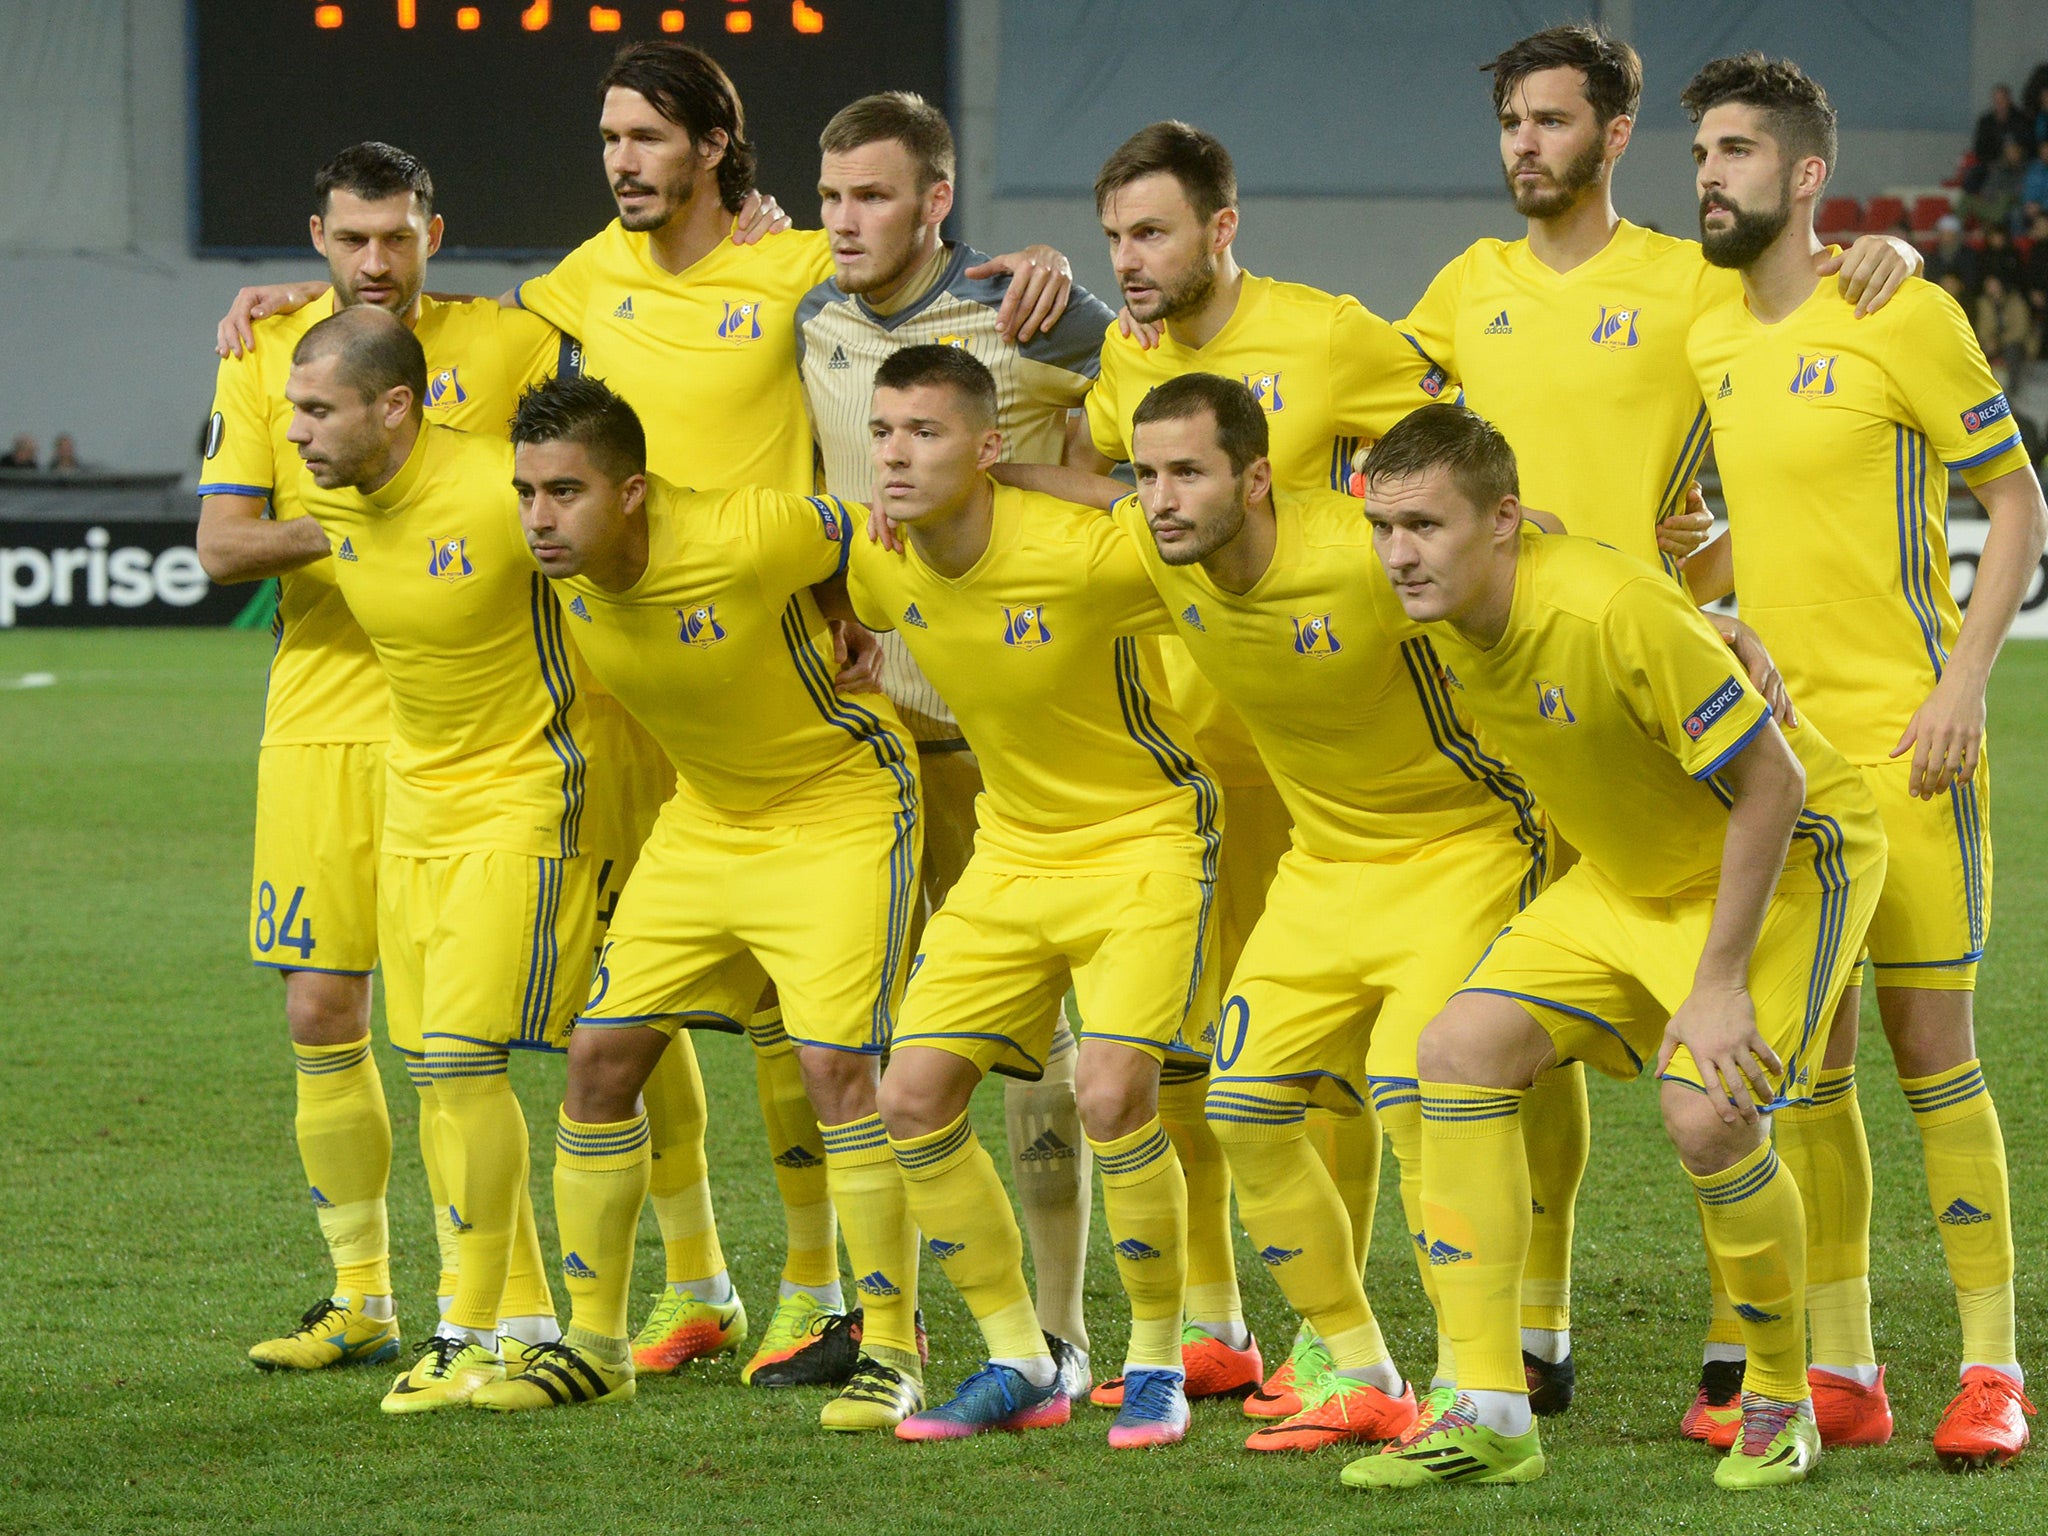 Rostov beat Sparta Prague in the round of 32 to go further than ever before in a major European competition